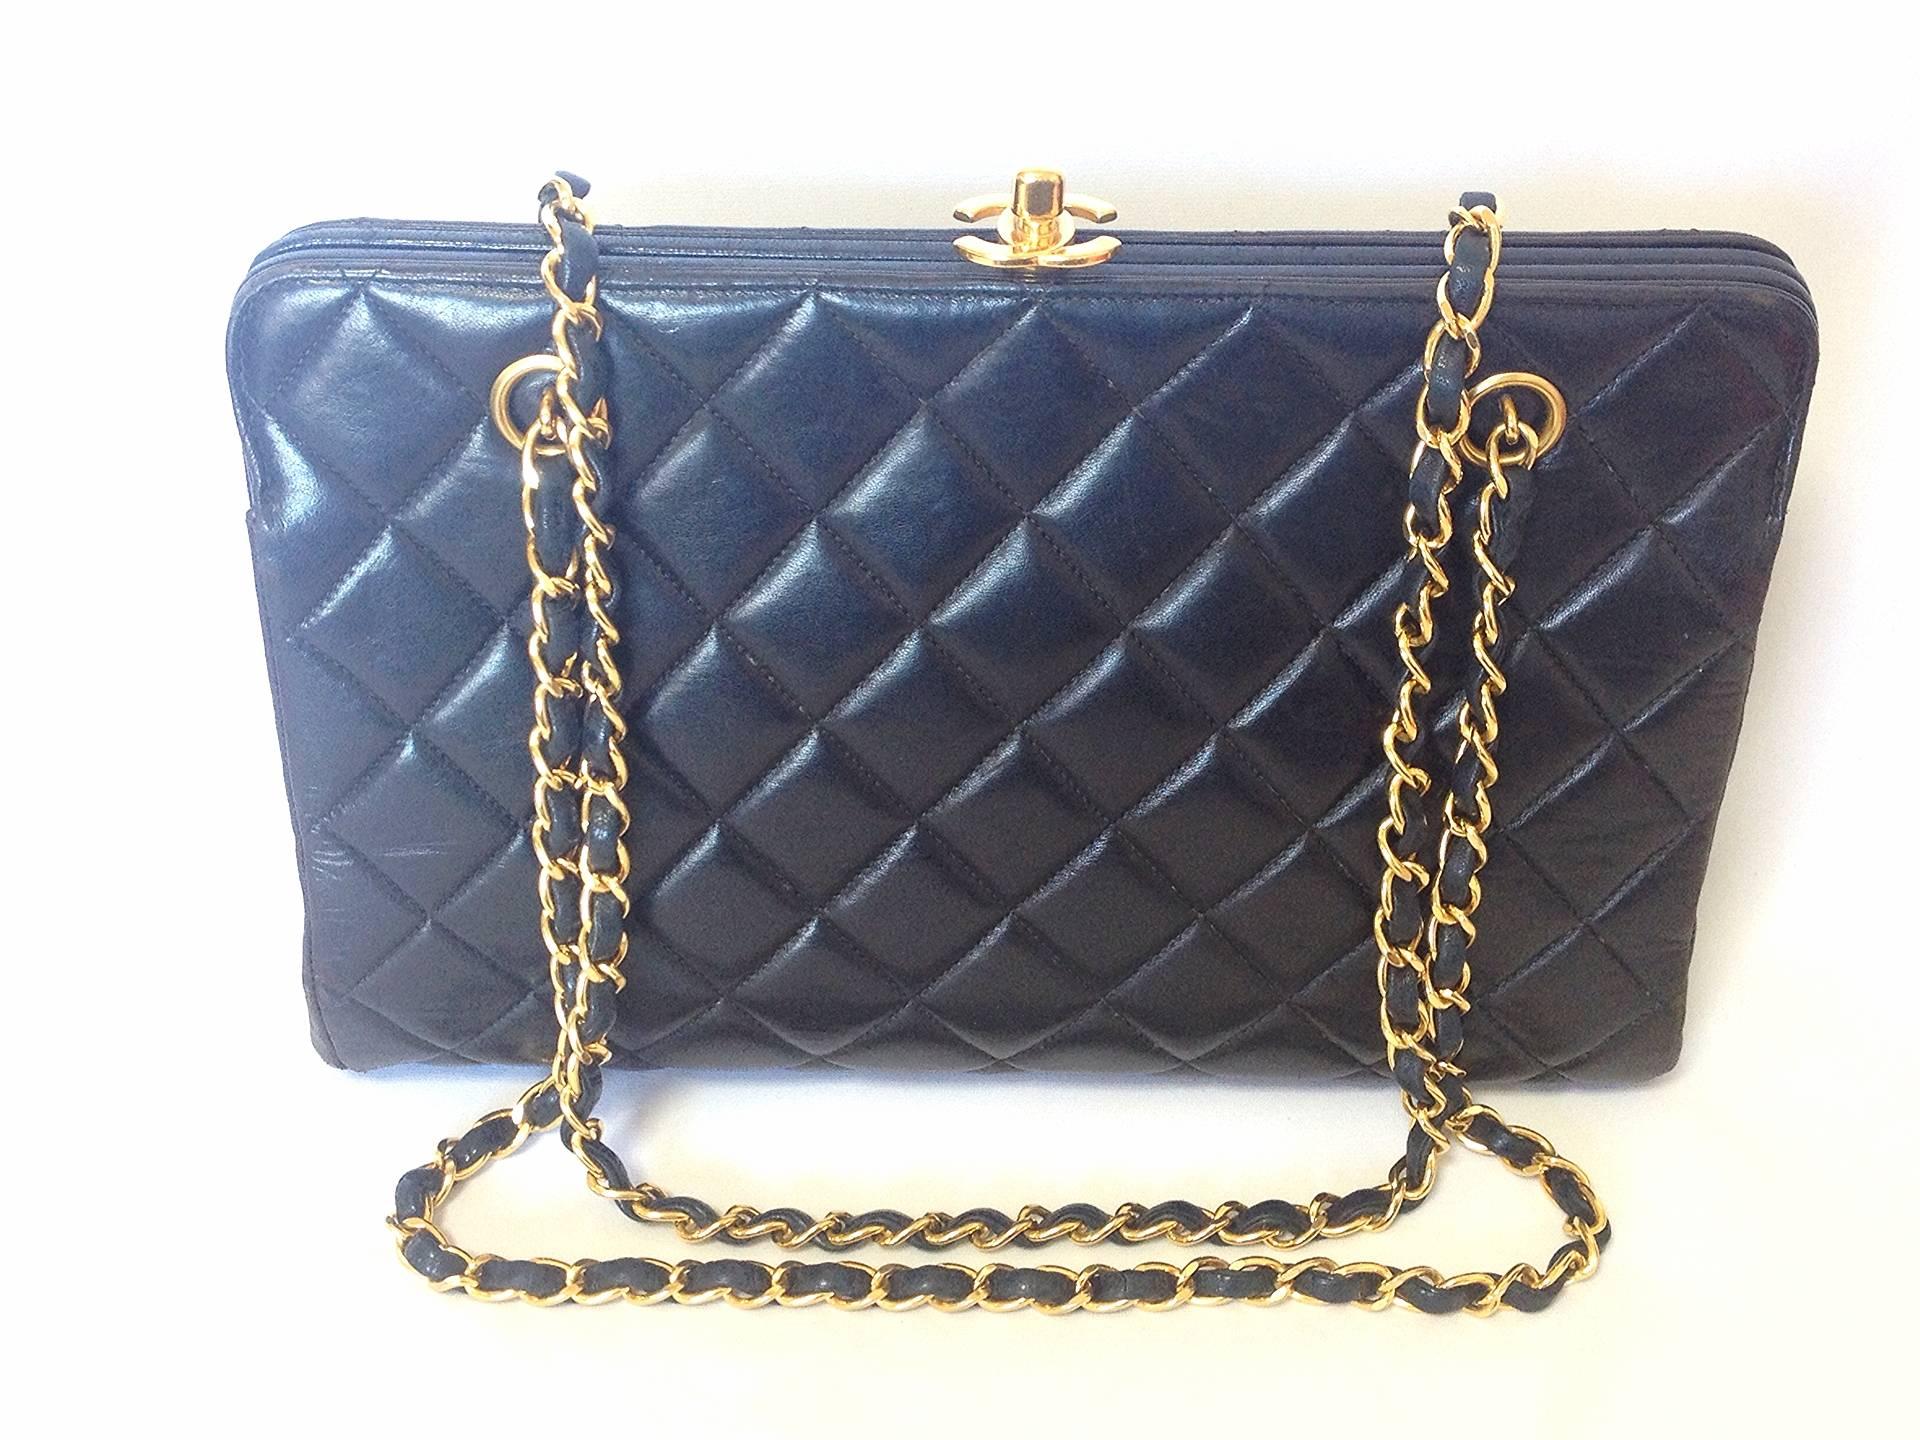 Vintage CHANEL black lambskin golden chain shoulder bag with golden CC kiss lock closure. Rare medium clutch type 2.55 but classic purse.

Introducing another vintage purse from CHANEL back in the 90's....
Rare and unique design black lambskin